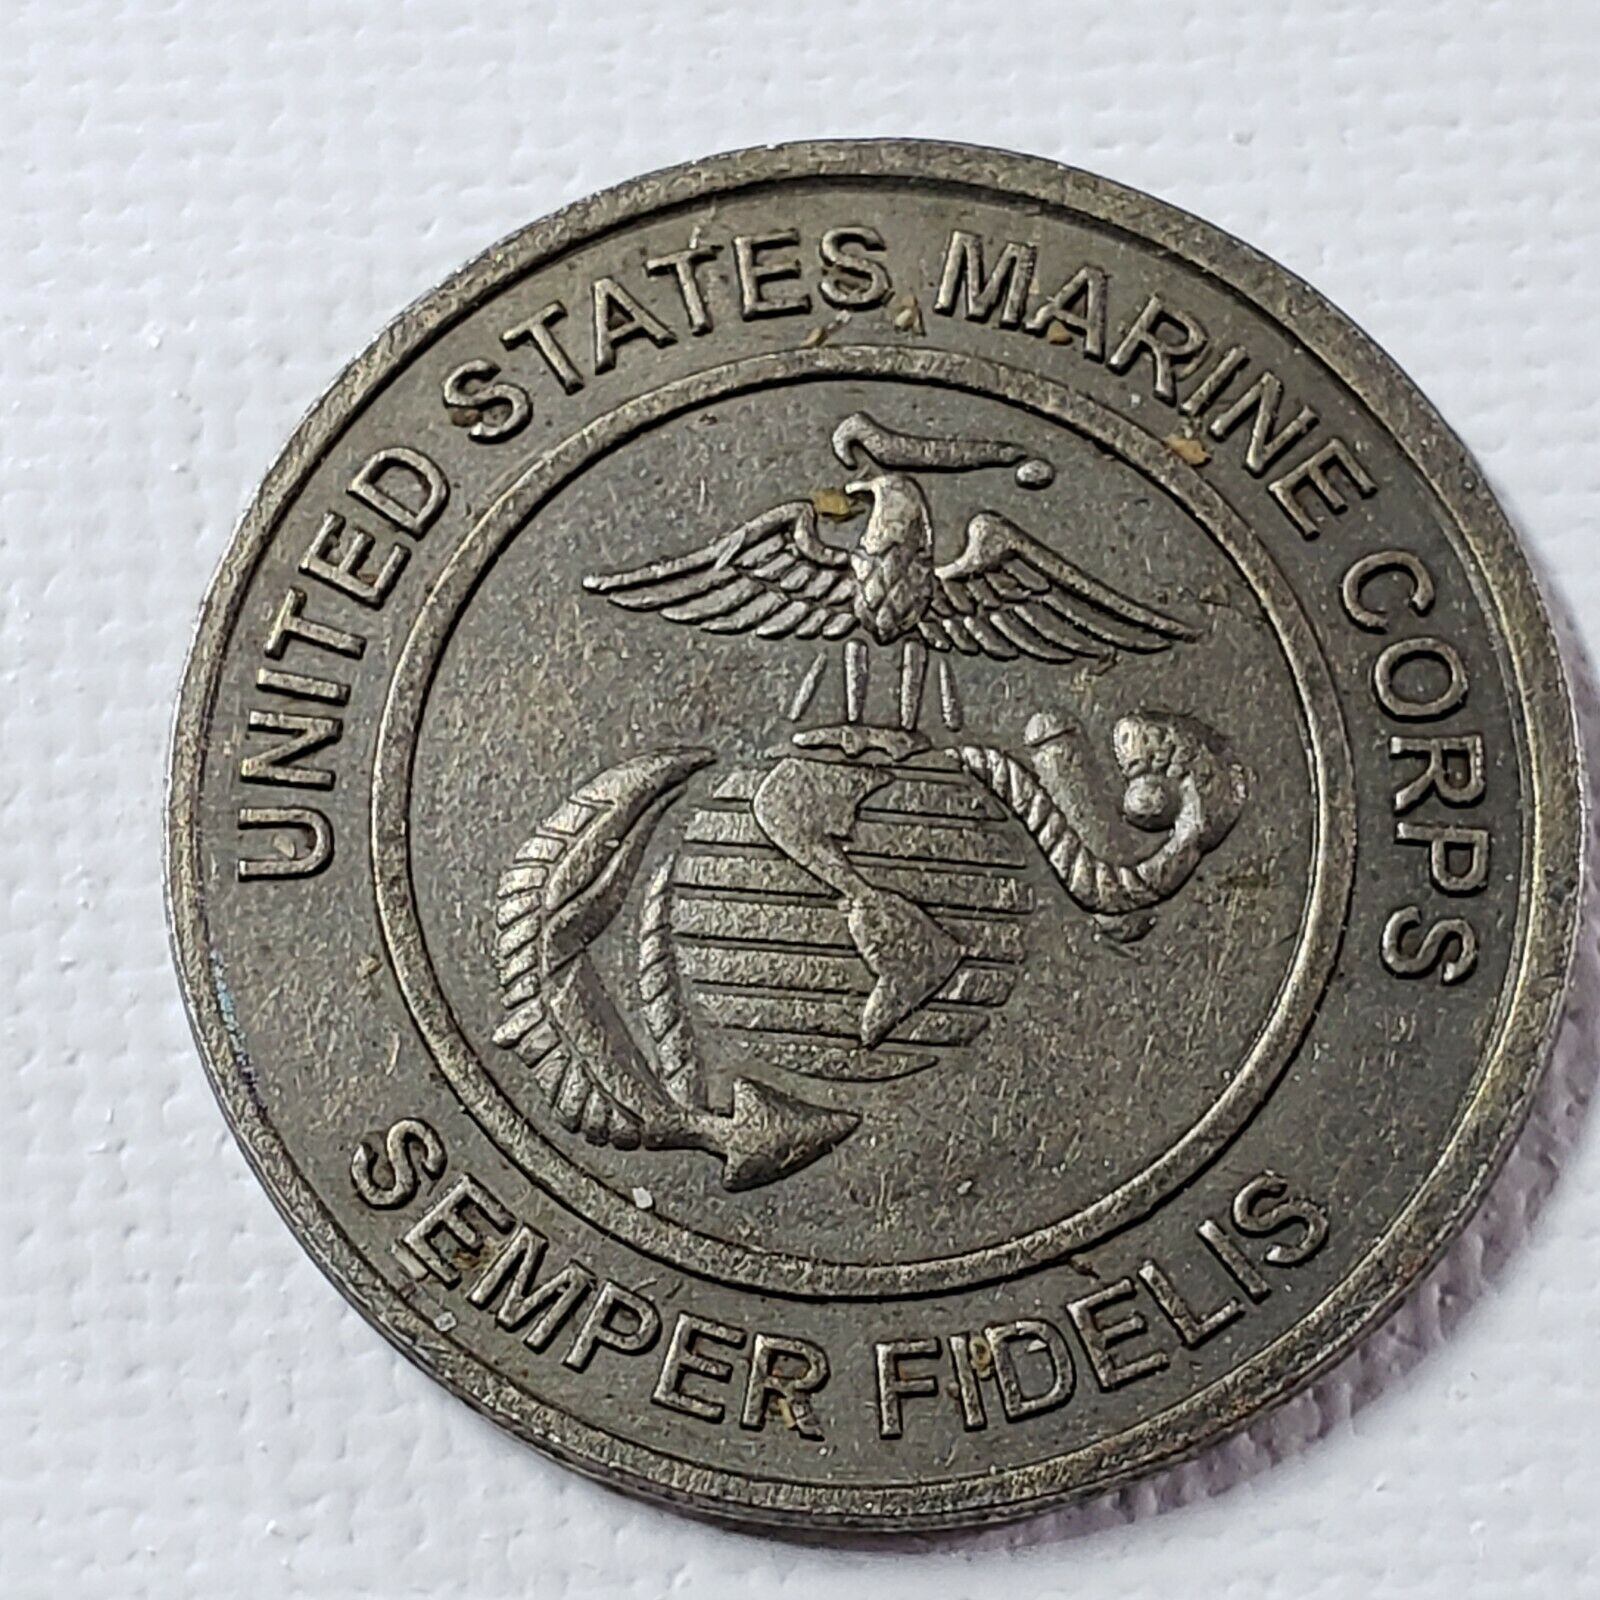 U.s. Marine Corps Toys For Tots Token